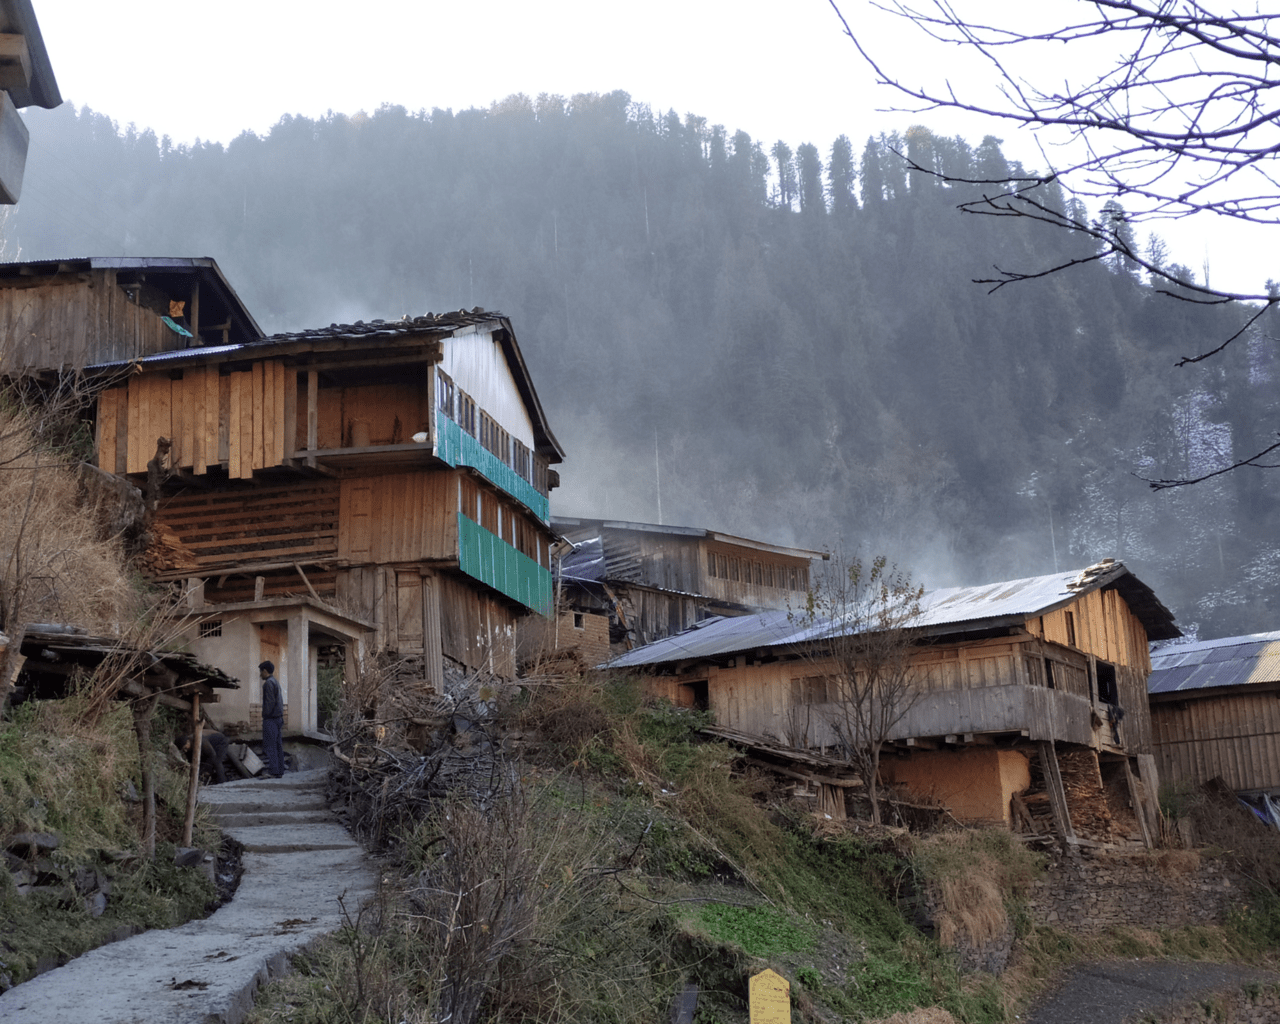 Itinerary for Barot valley